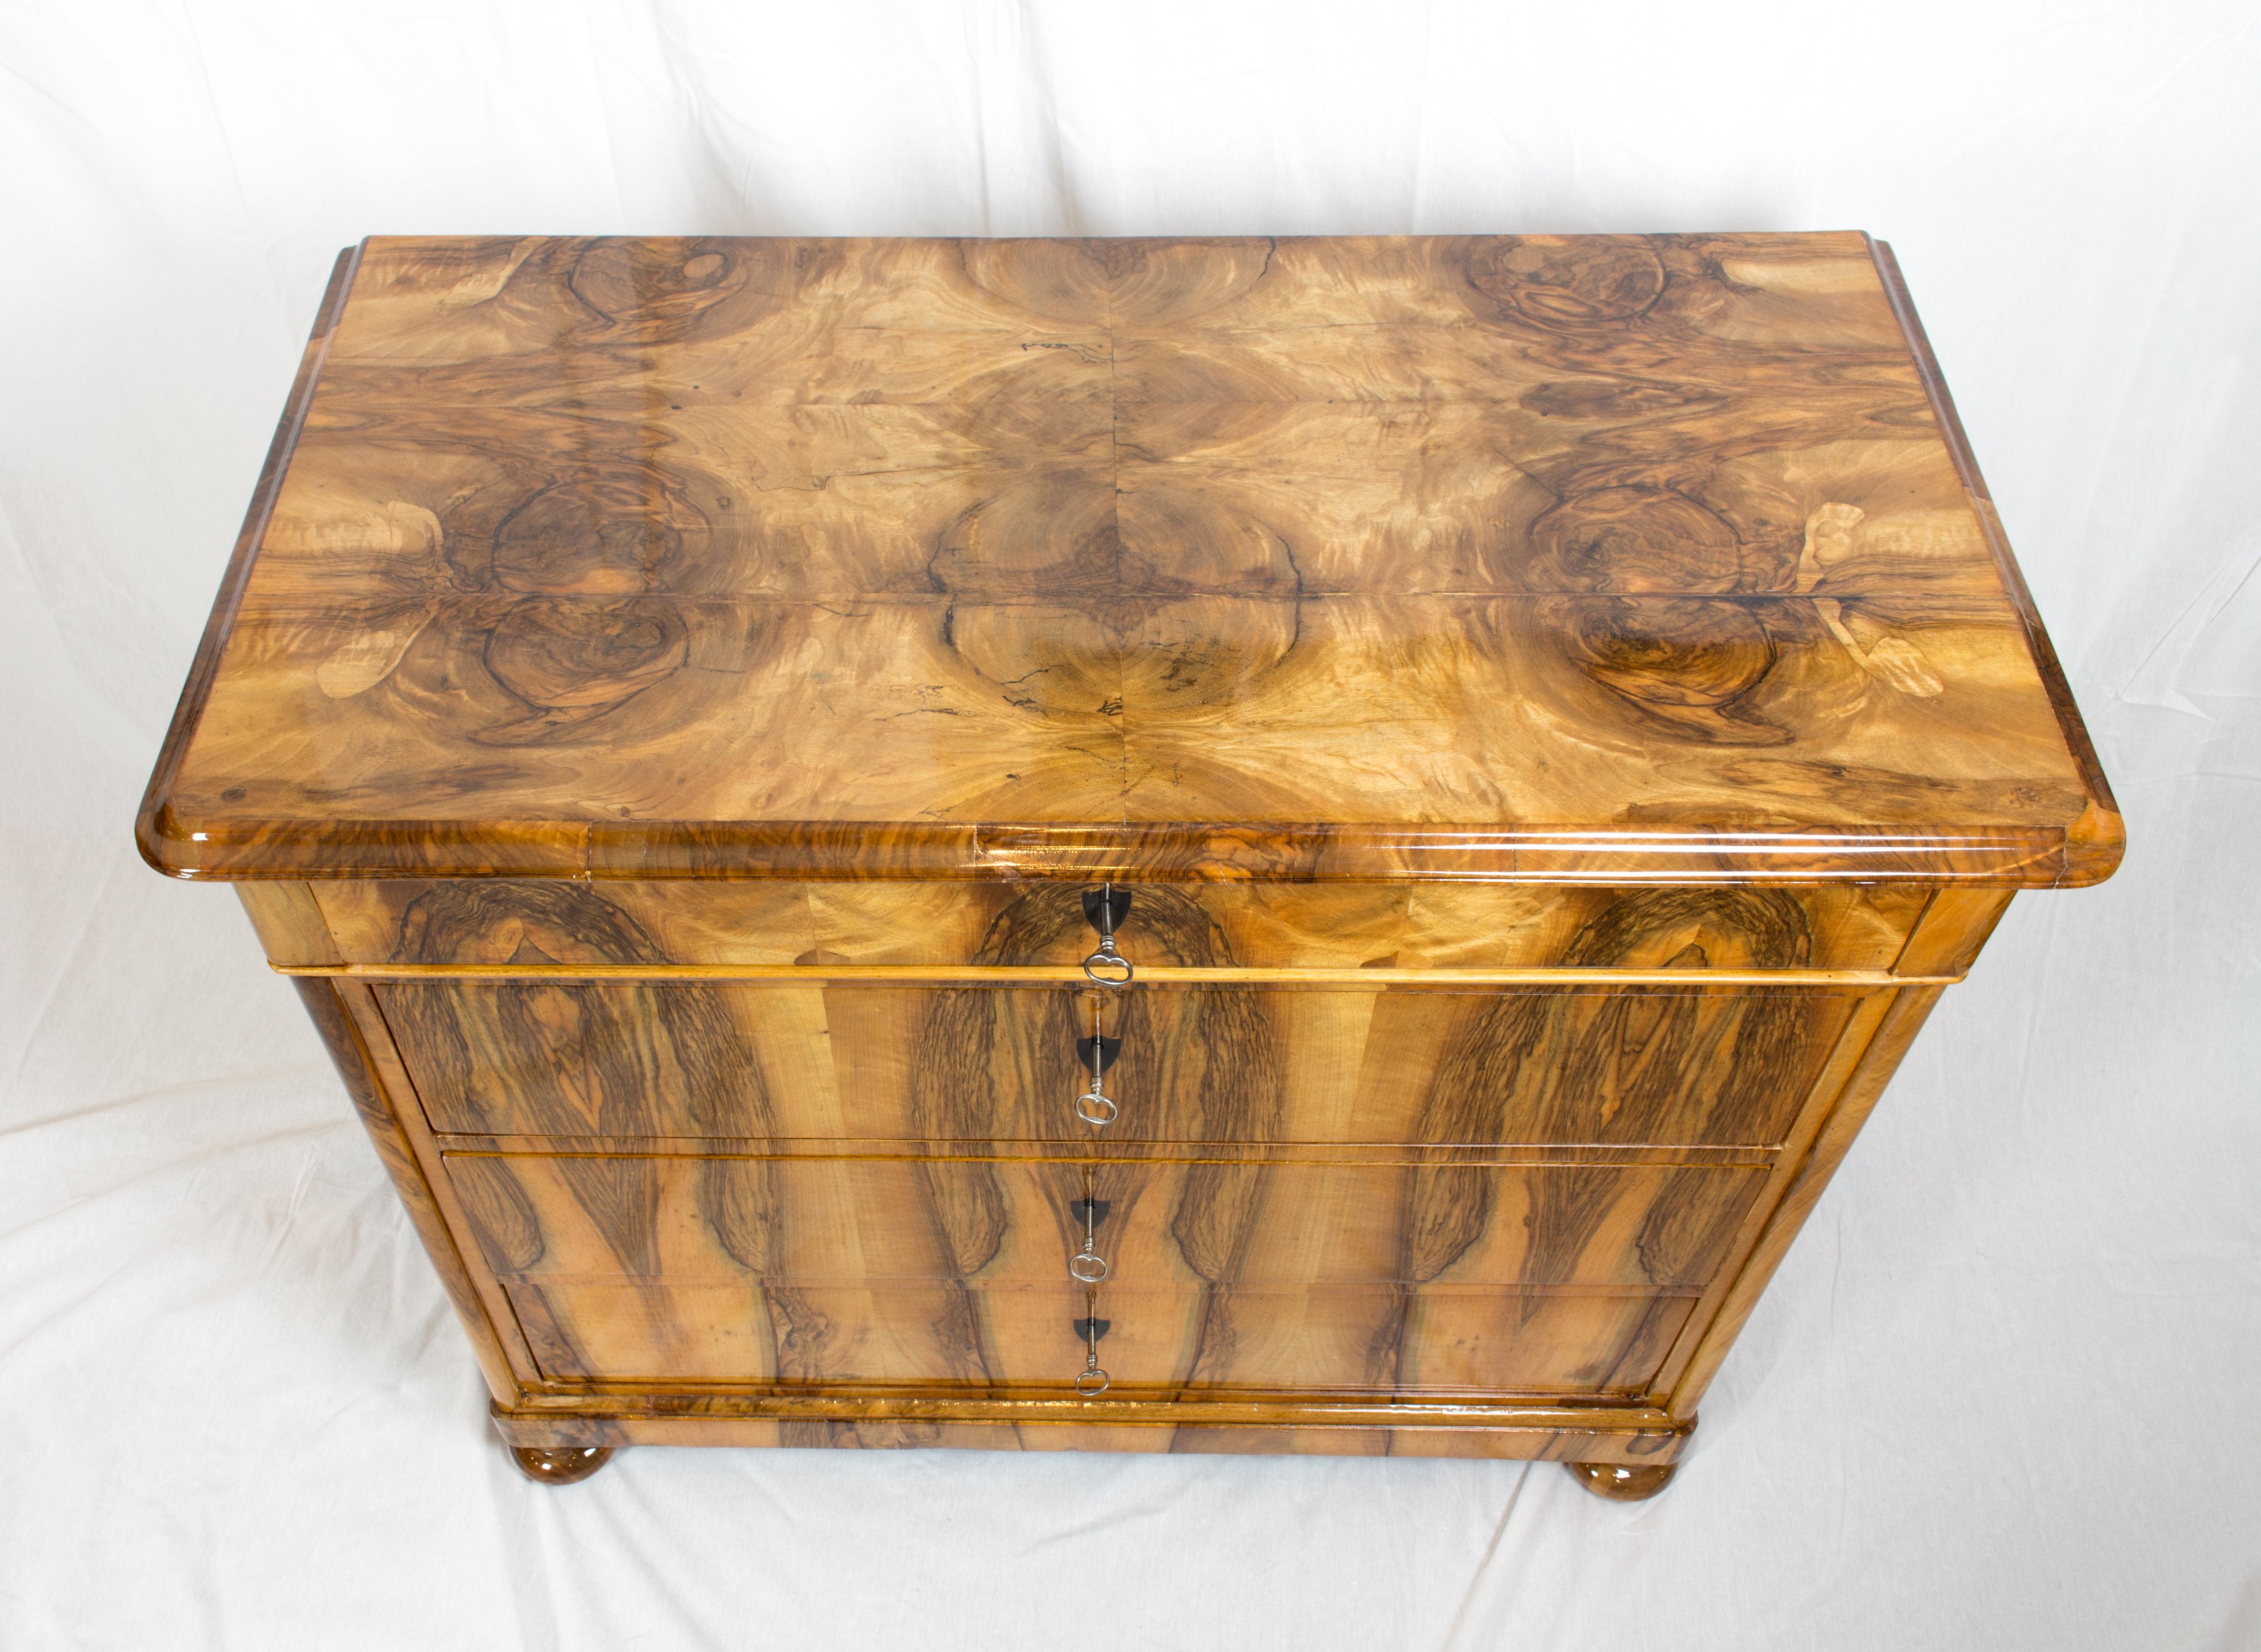 Polished Early 19th Century Biedermeier Walnut Chest of Drawers or Commode